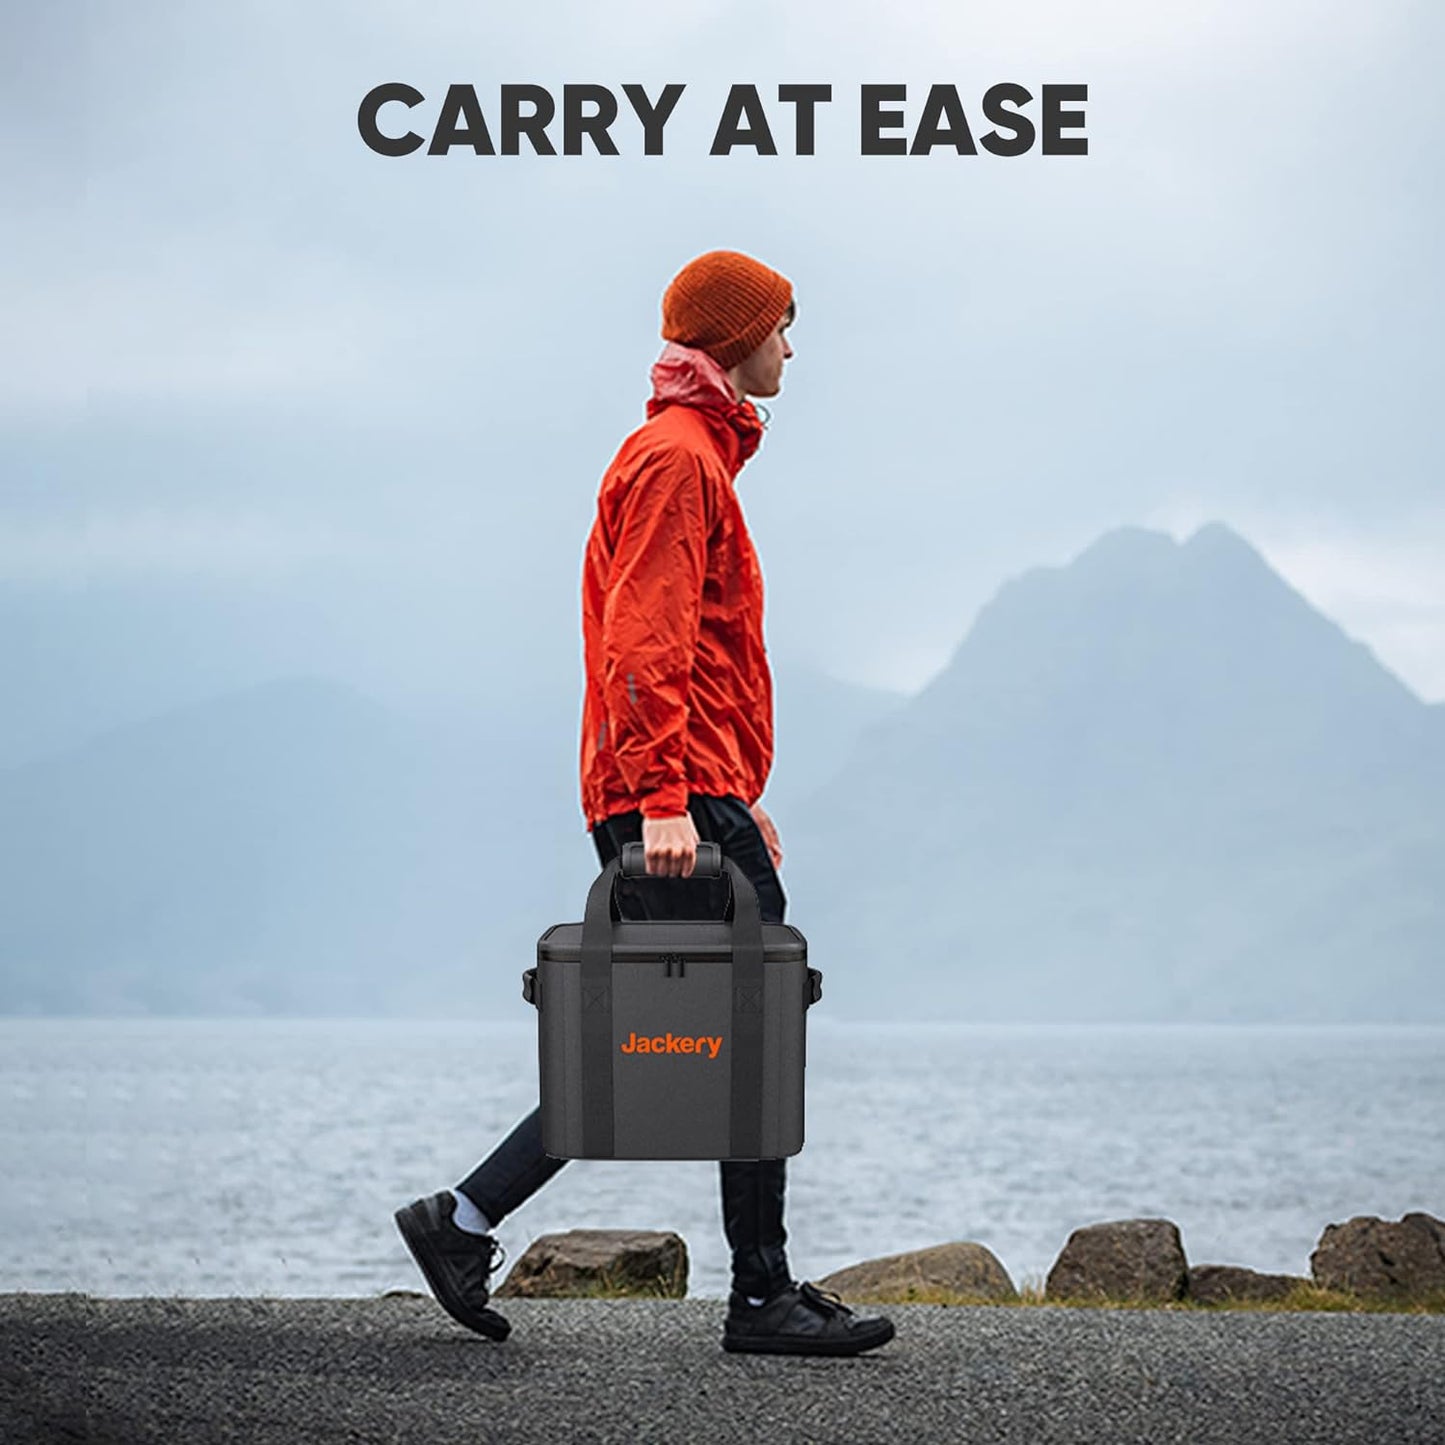 Jackery Carrying Case Bag (M Size) for Explorer 1000 \/ 1000Pro Portable Power Station - Black (Power Station Not Included)